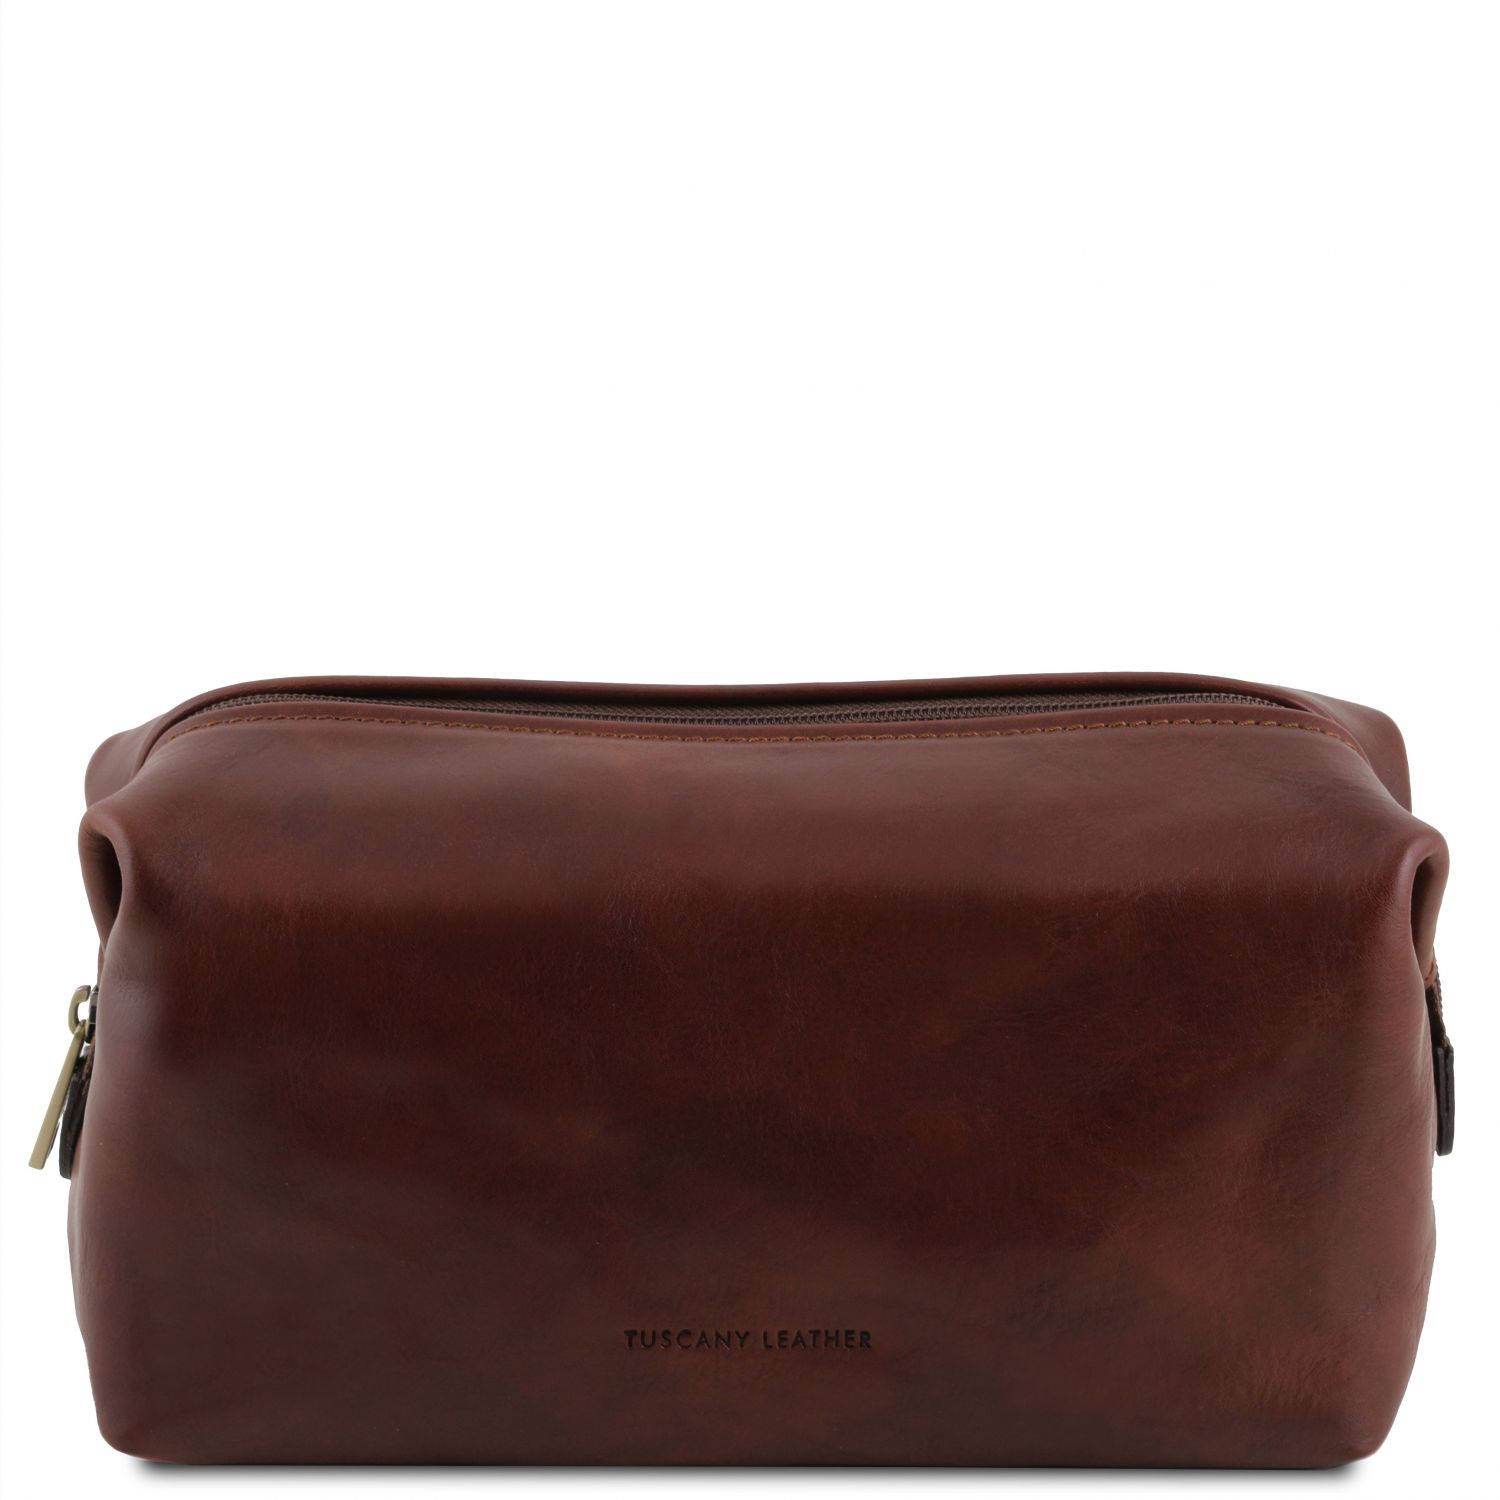 Leather Toiletry Bag - Small Size - Smarty